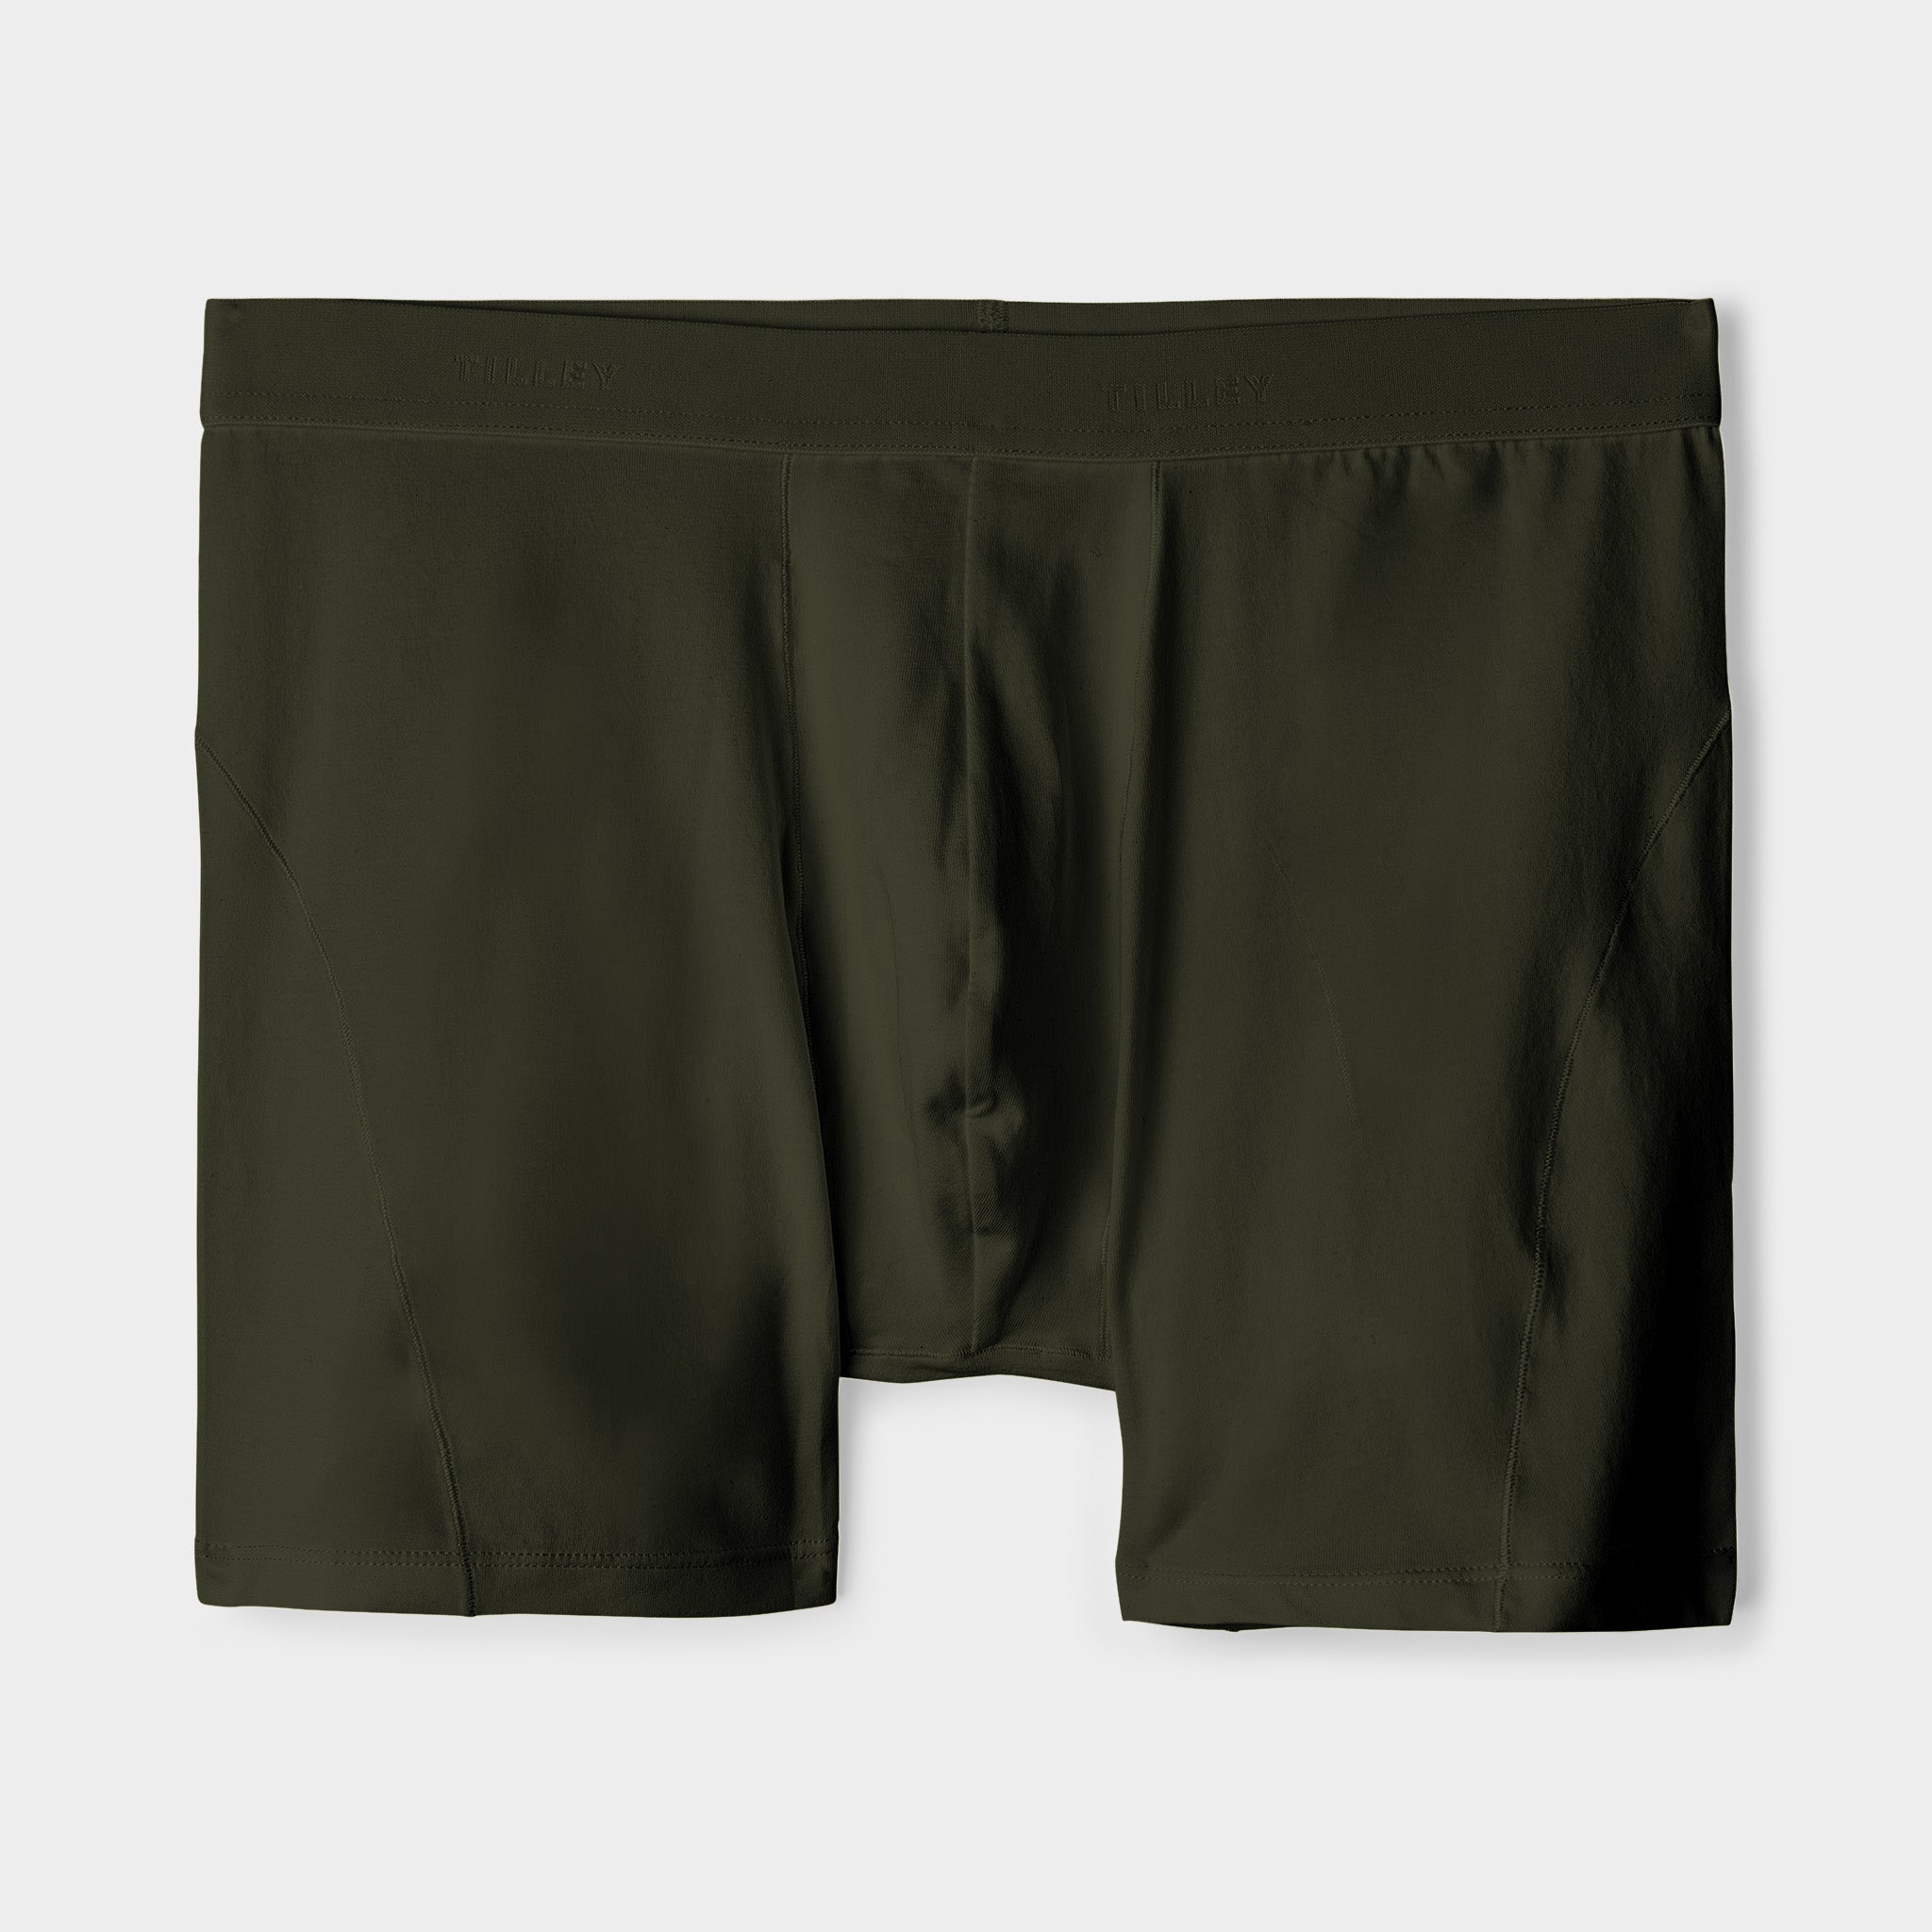 Men's Everyday Boxer Brief 4-pack made with Organic Cotton